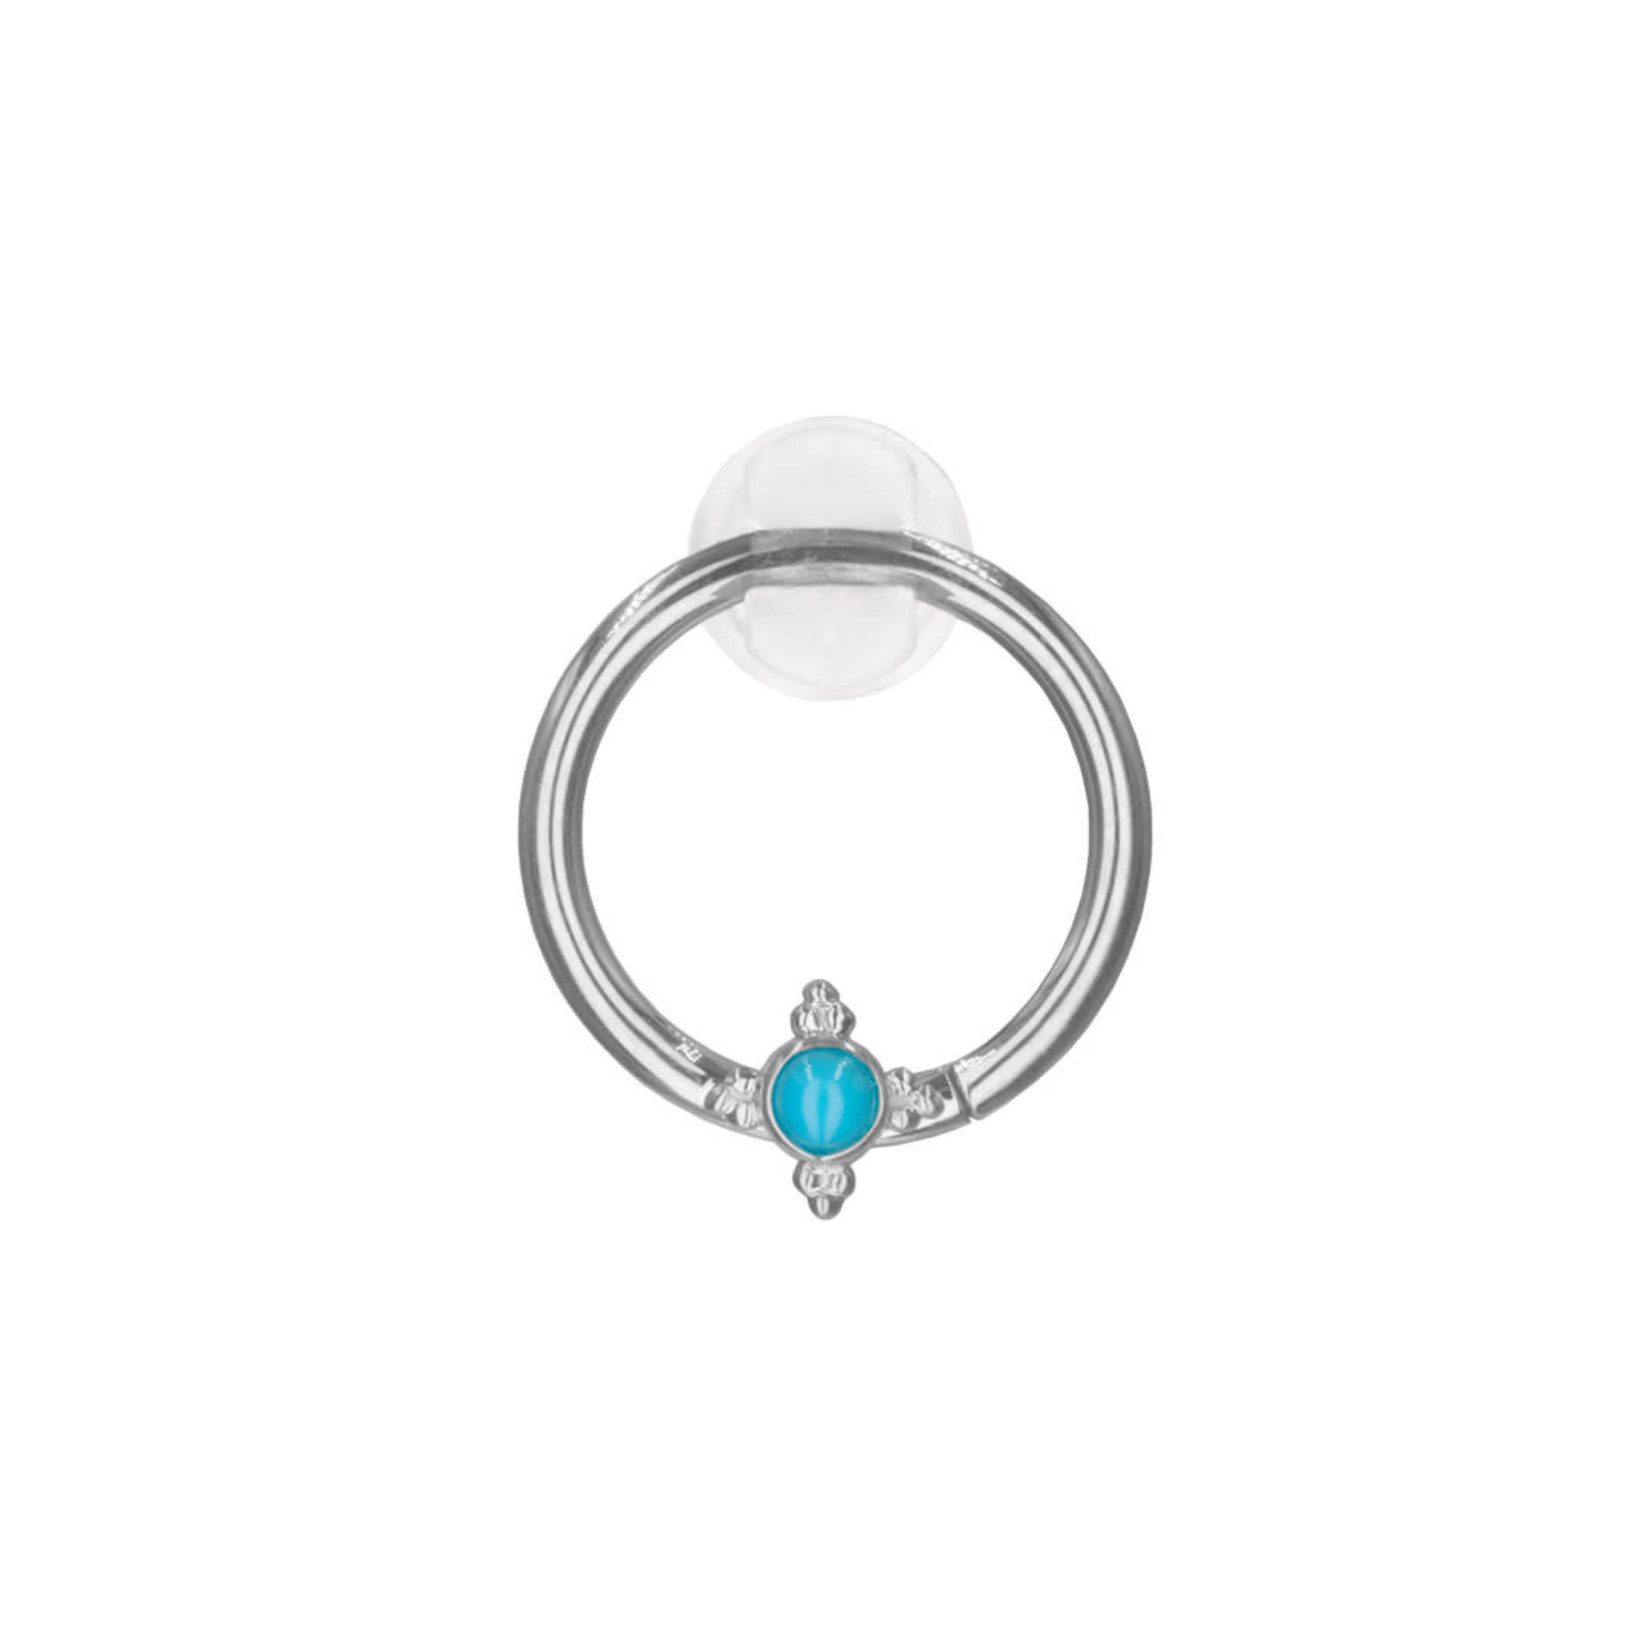 BVLA 16g BVLA Fixed ring with "Mini Kandy" and 2.0 turquoise